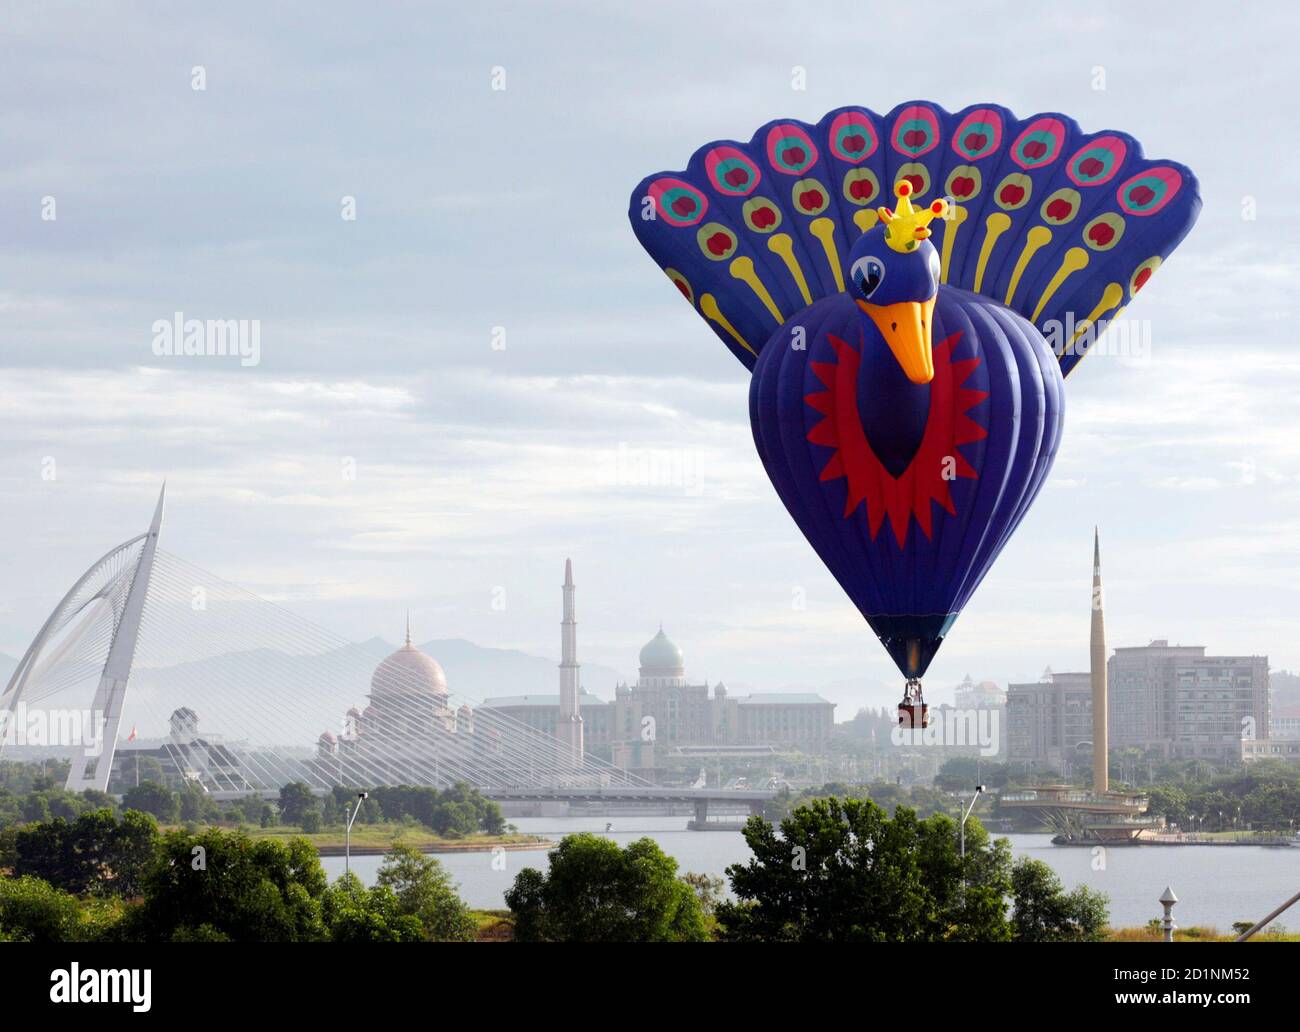 The hot air balloon of A. J. Troost named 'Peacock' from the Netherlands floats over Malaysia's landmarks Seri Wawasan Bridge (L), Putra Mosque (2nd L), Prime Minister's Office Putra Perdana (2nd R) and Millennium Monument Putrajaya, during International Hot Air Balloon Fiesta 2009 in Putrajaya outside Kuala Lumpur March 21, 2009. The four-day show ends on Sunday with participants from Belgium, New Zealand, Netherlands, France, United States, Philippines, Switzerland, Japan and Malaysia. REUTERS/Bazuki Muhammad (MALAYSIA SOCIETY) Stock Photo